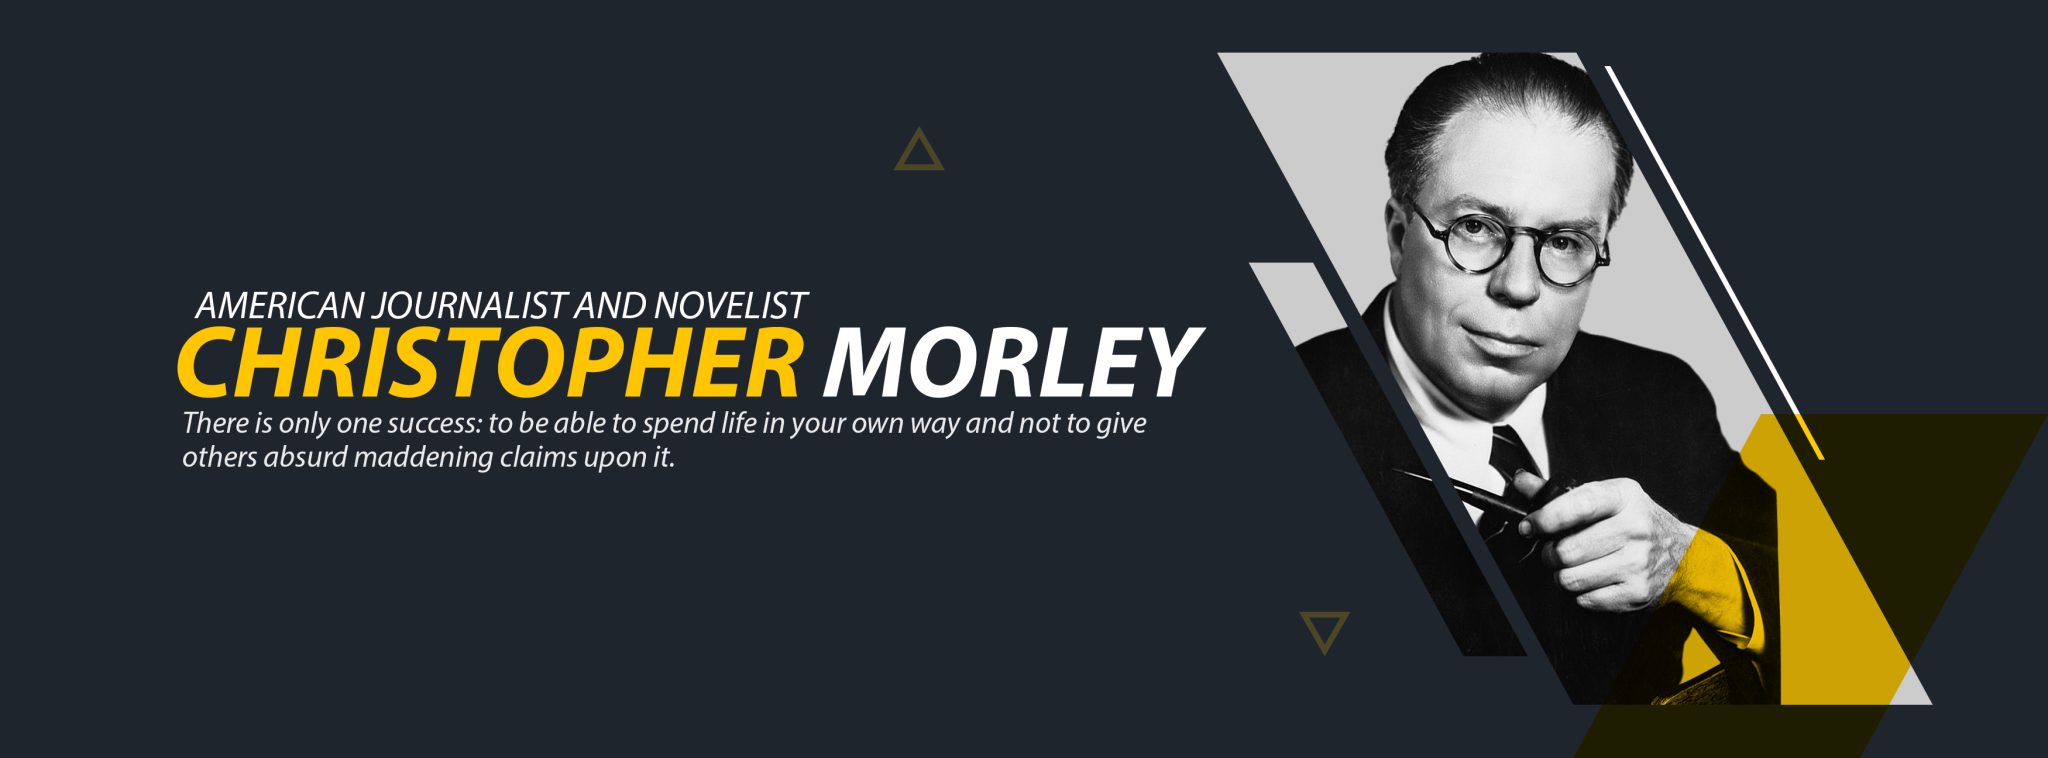 Inspiring quotes by Christopher Morley - Live Online Radio Blog